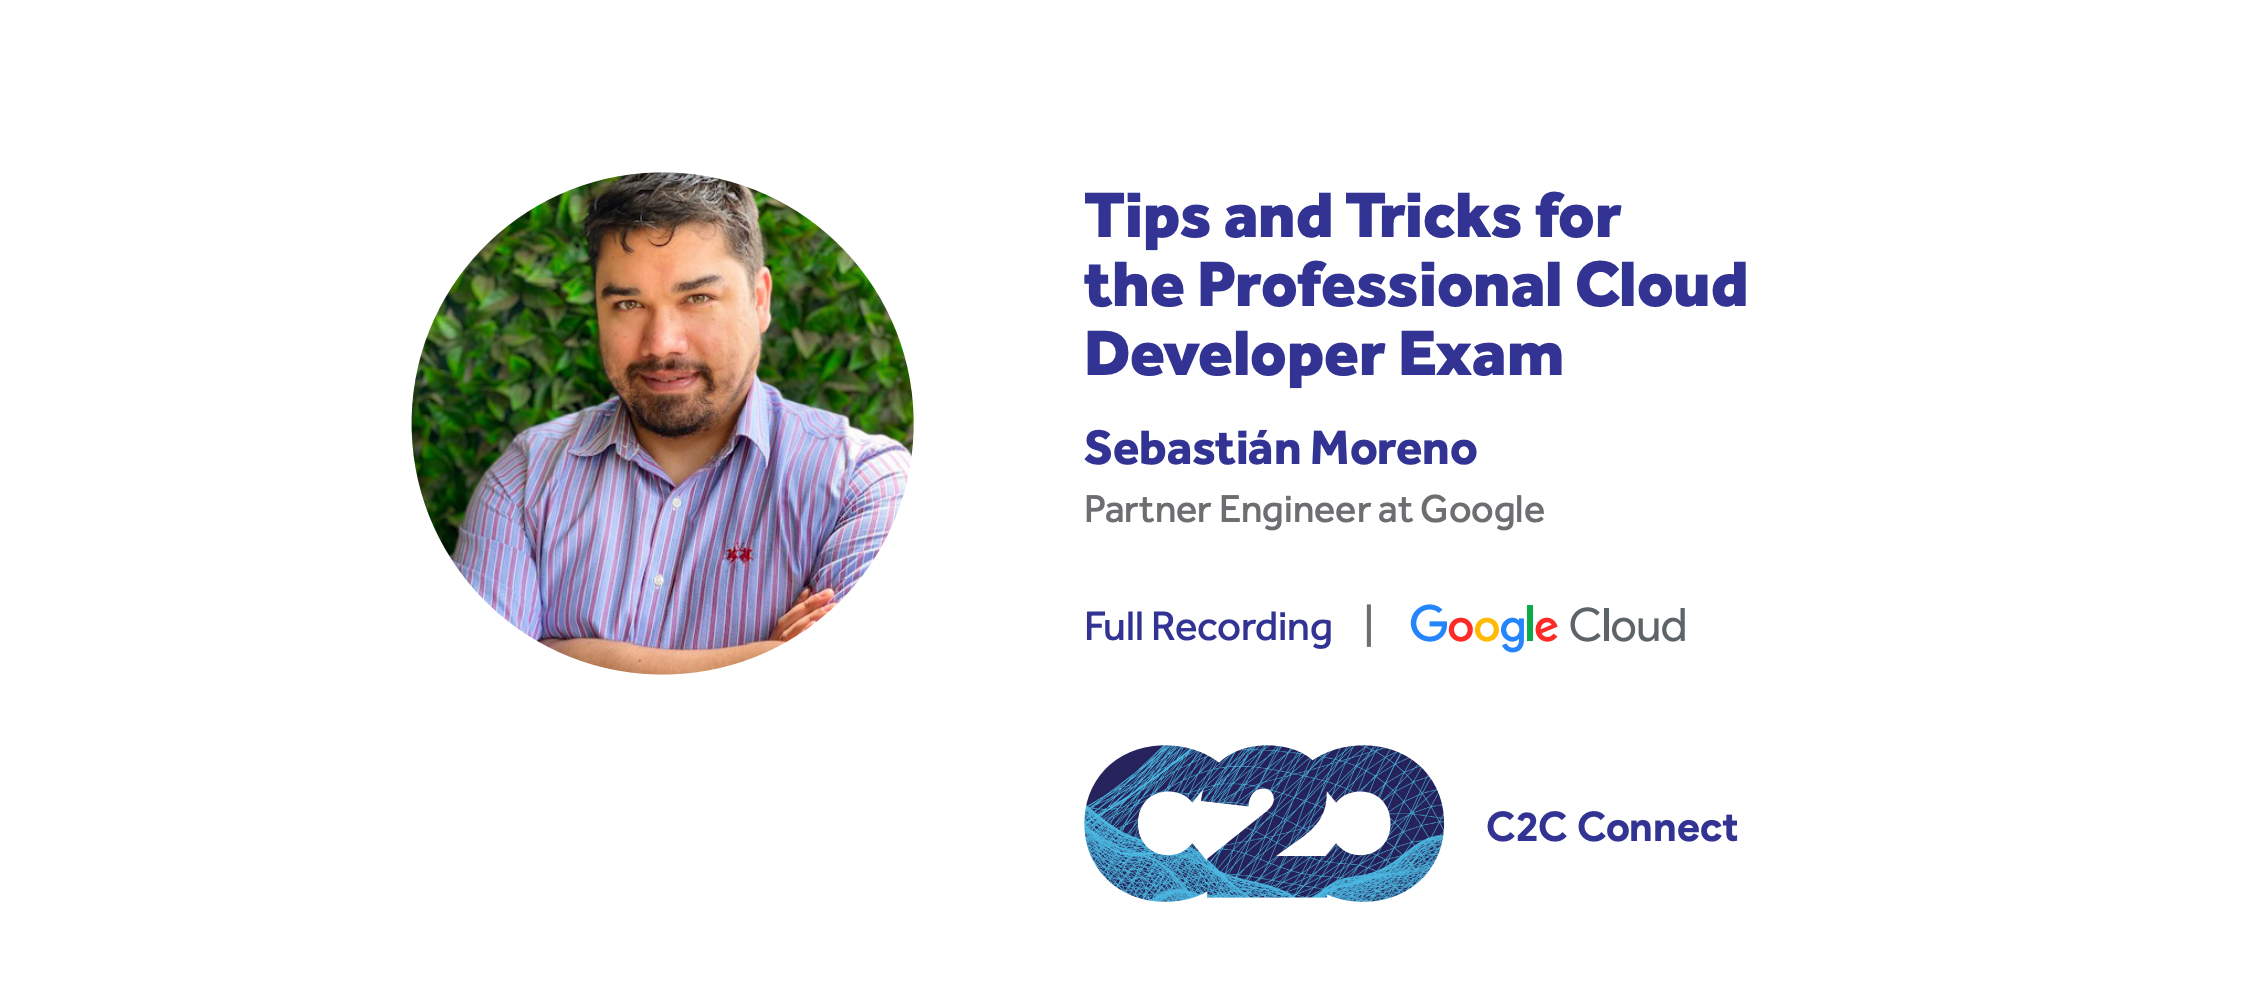 Tips and Tricks for the Professional Cloud Developer Exam (full recording)